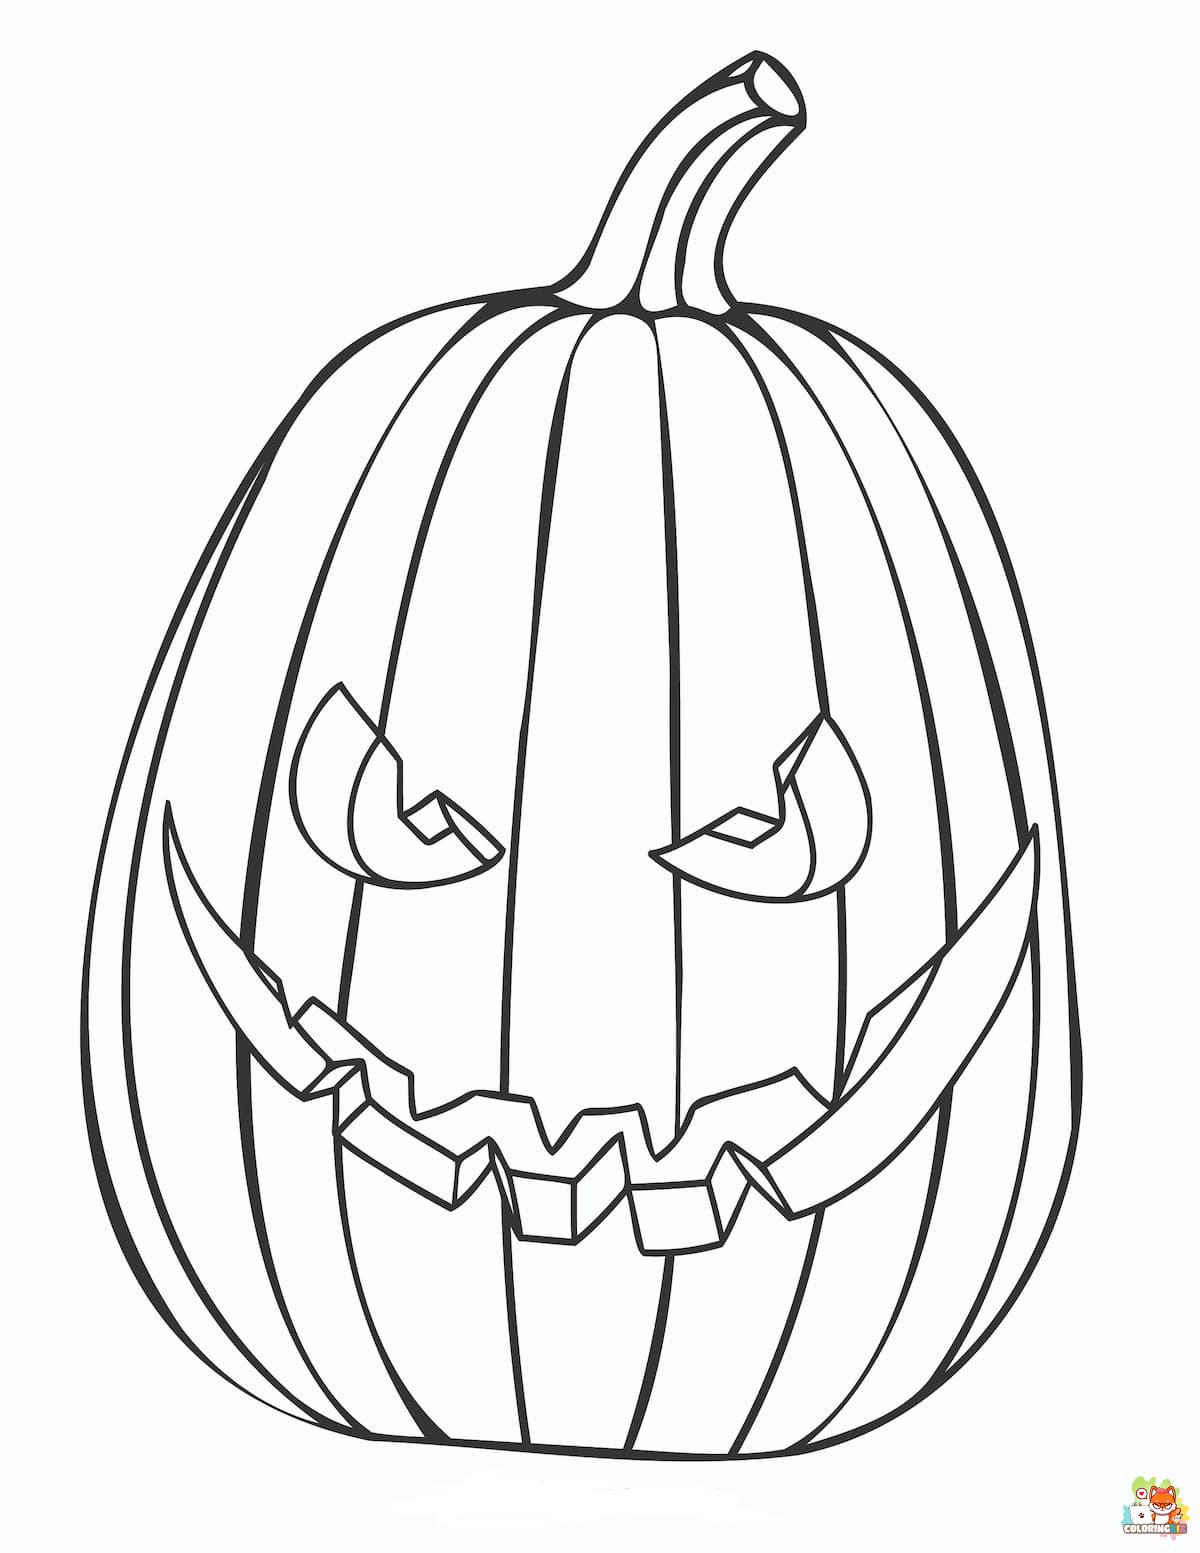 Pumpkin Halloween Coloring Pages 3